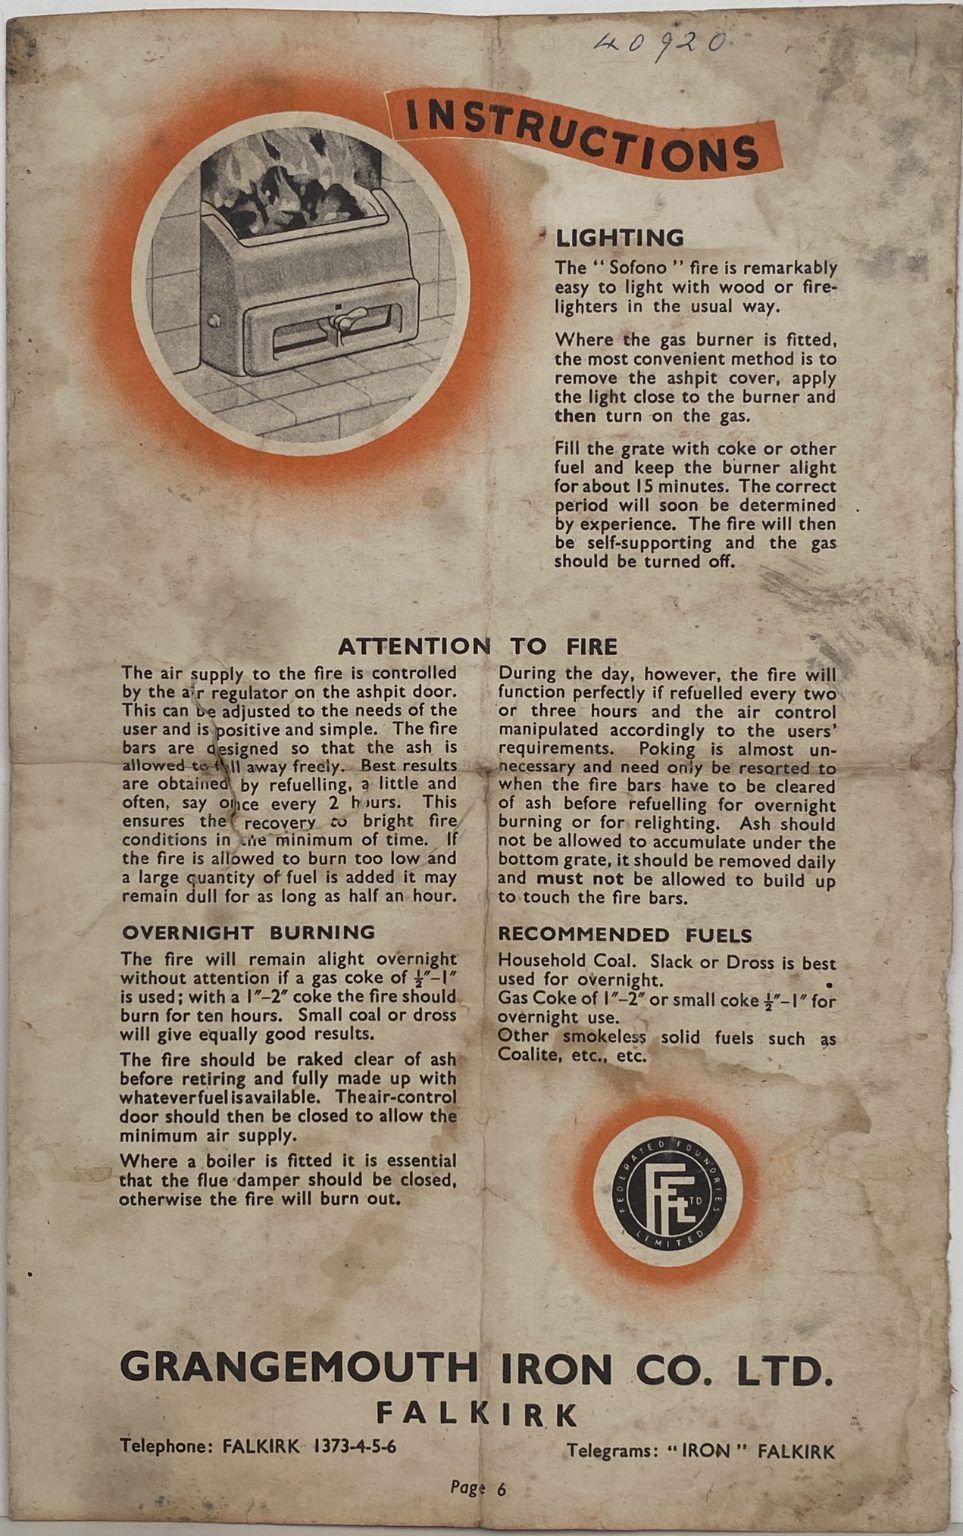 OLD INSTRUCTION MANUAL: for Sofono Fire / Grangemouth Iron Co circa 1950s